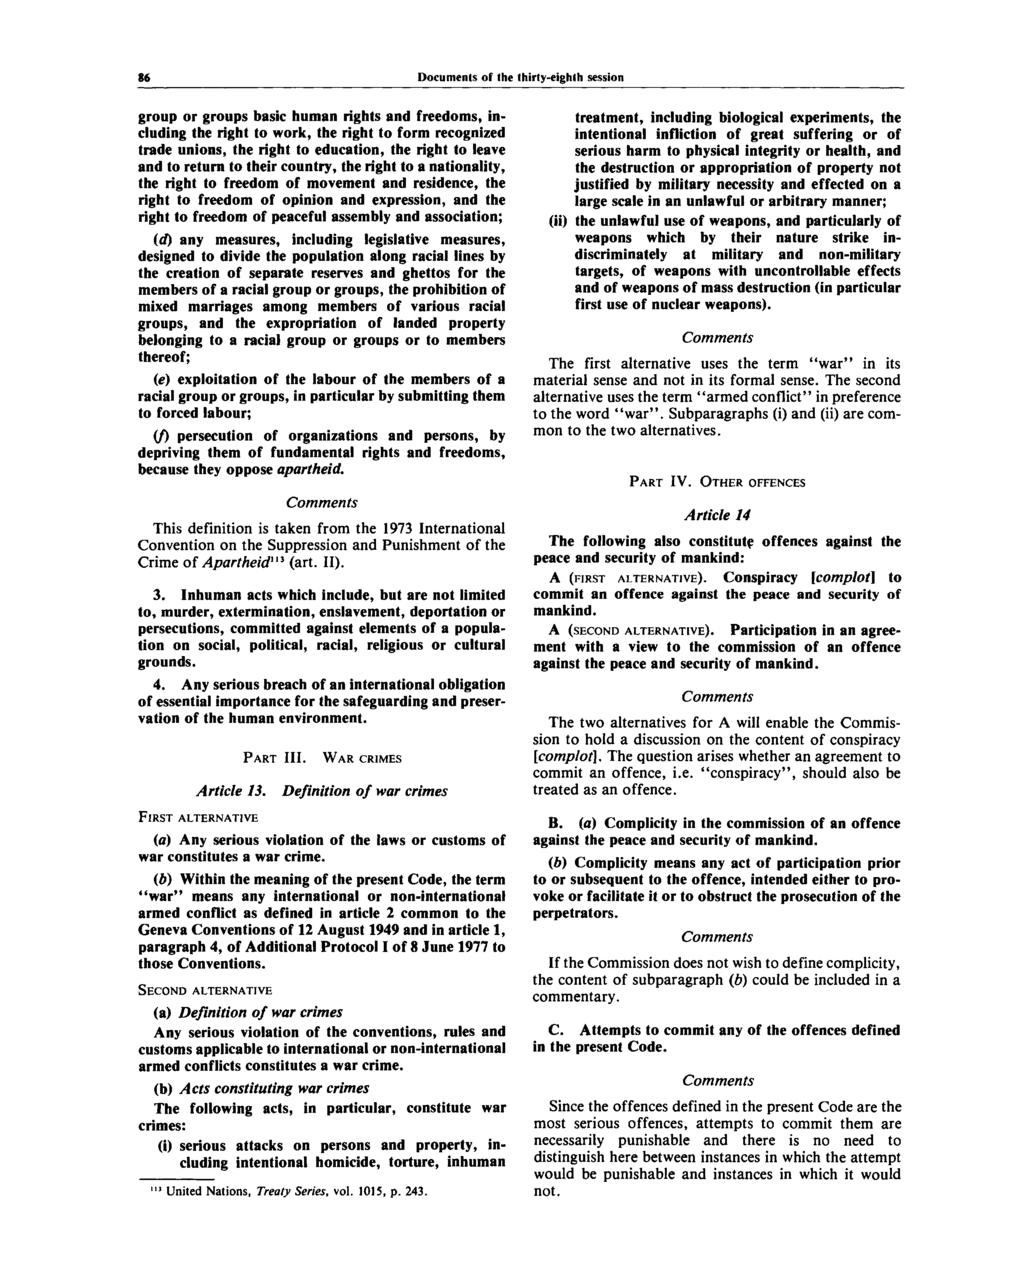 86 Documents of the thirty-eighth session group or groups basic human rights and freedoms, including the right to work, the right to form recognized trade unions, the right to education, the right to